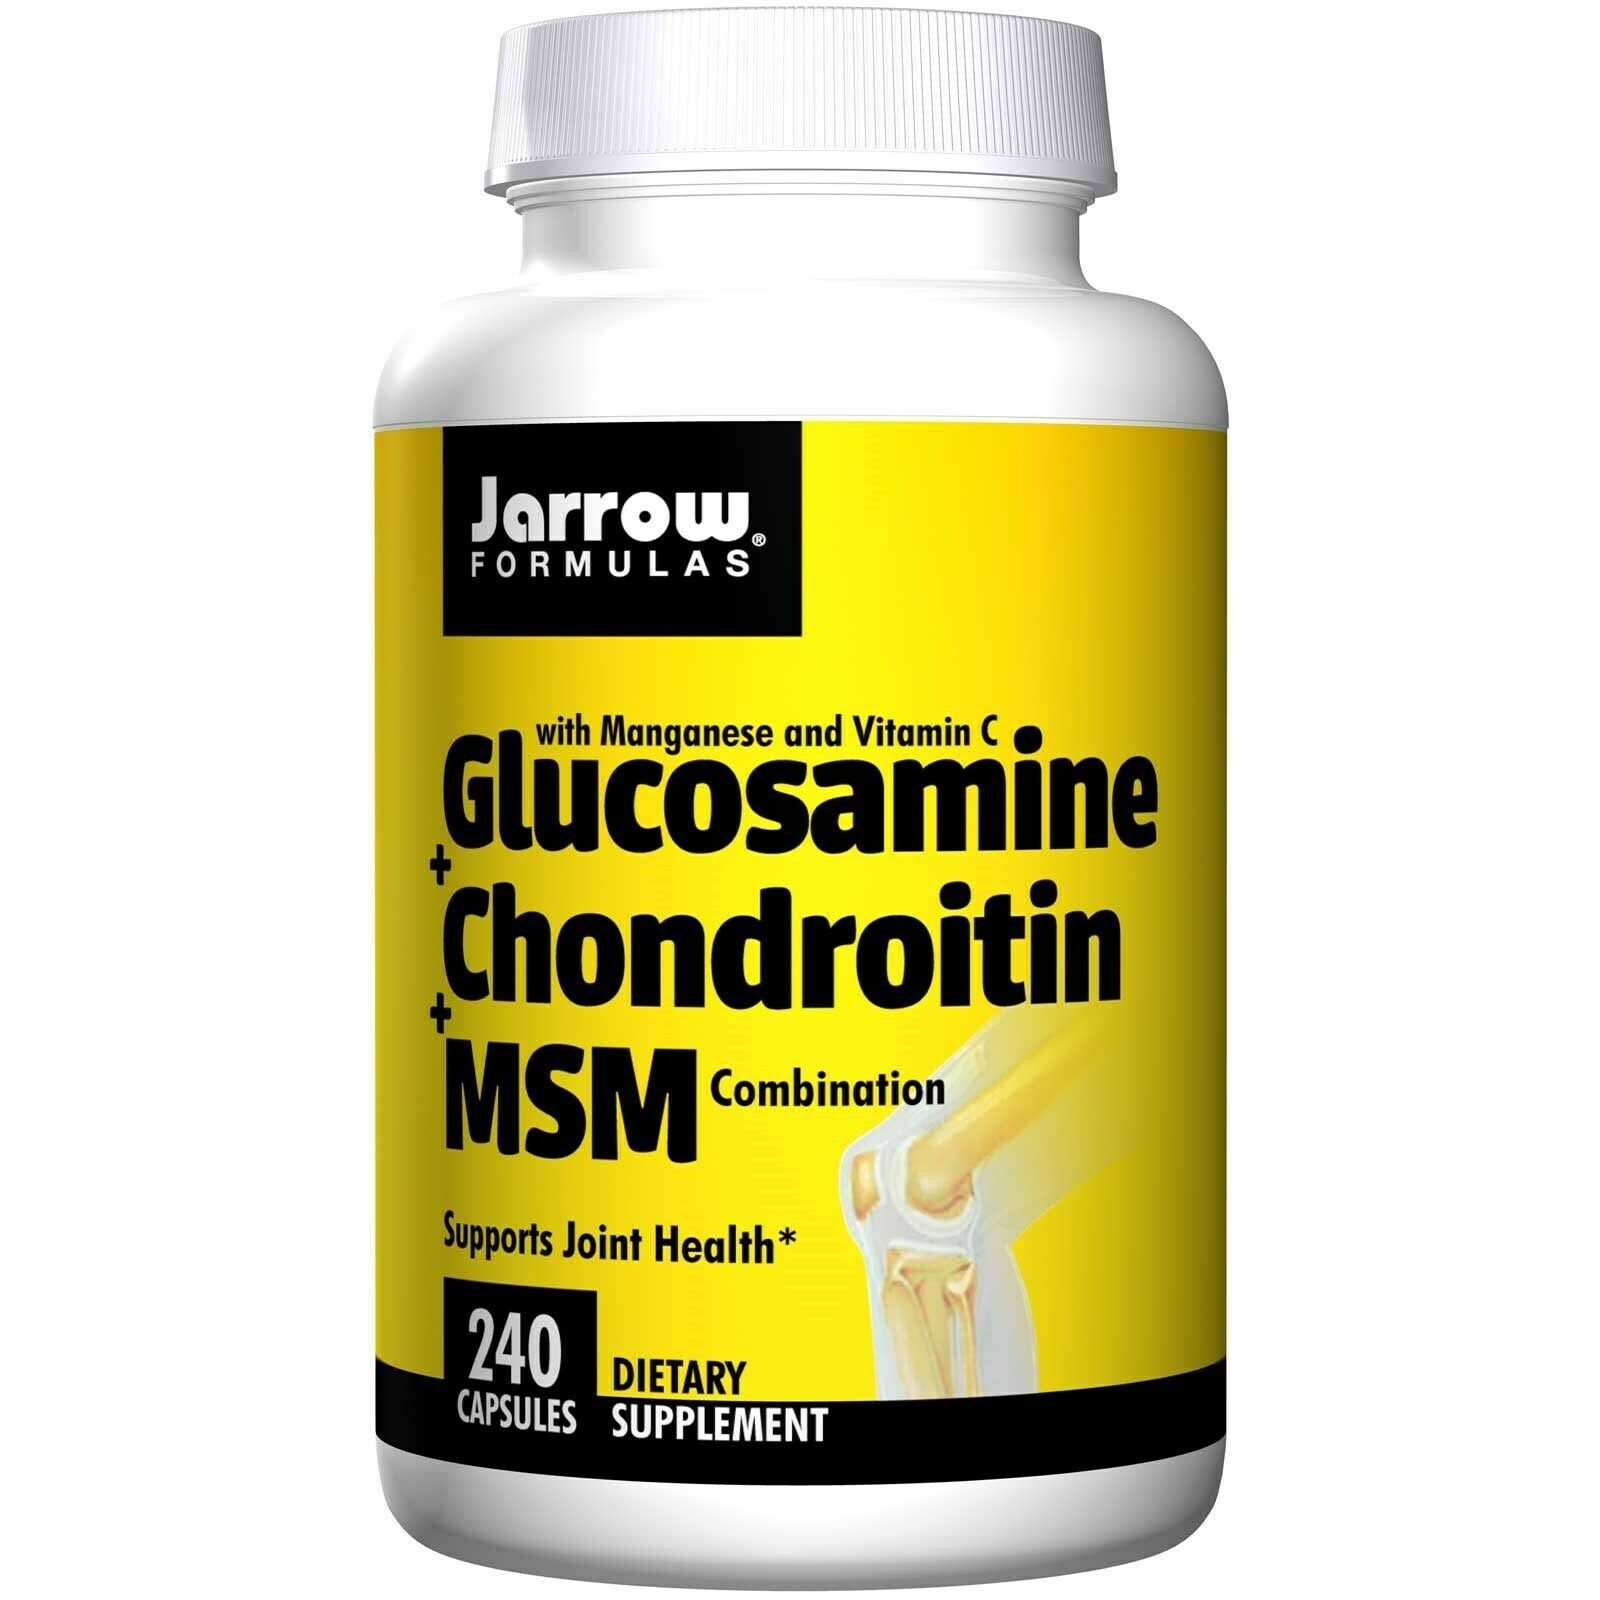 Jarrow Formulas Glucosamine and Chondroitin and MSM Supplement - 240 Capsules